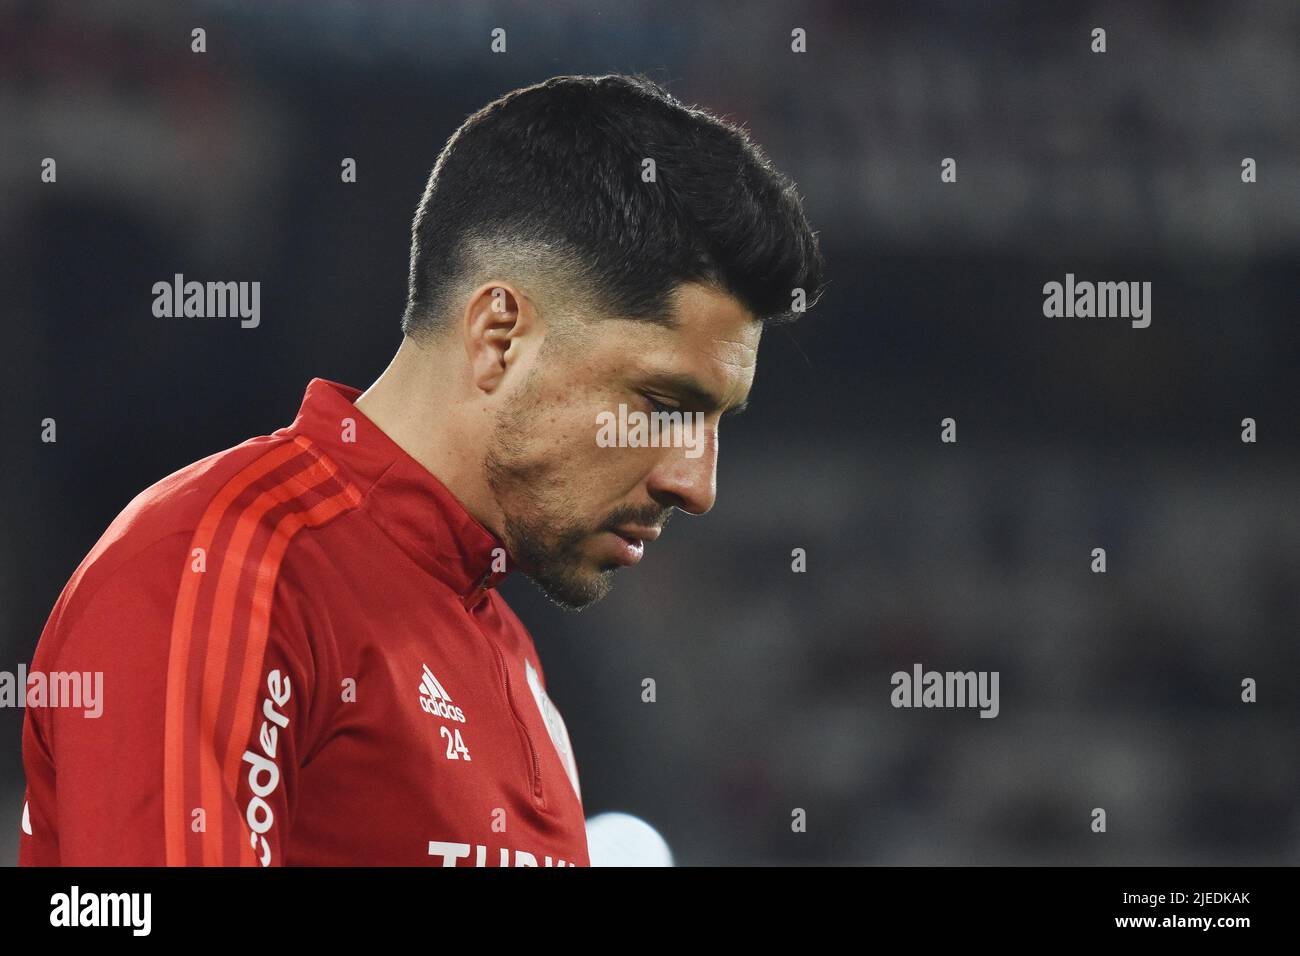 Buenos Aires, Arg - June 27. Enzo Perez of River Plate during a Liga de Fútbol Profesional match between River and Lanús at Estadio Monumental. Stock Photo